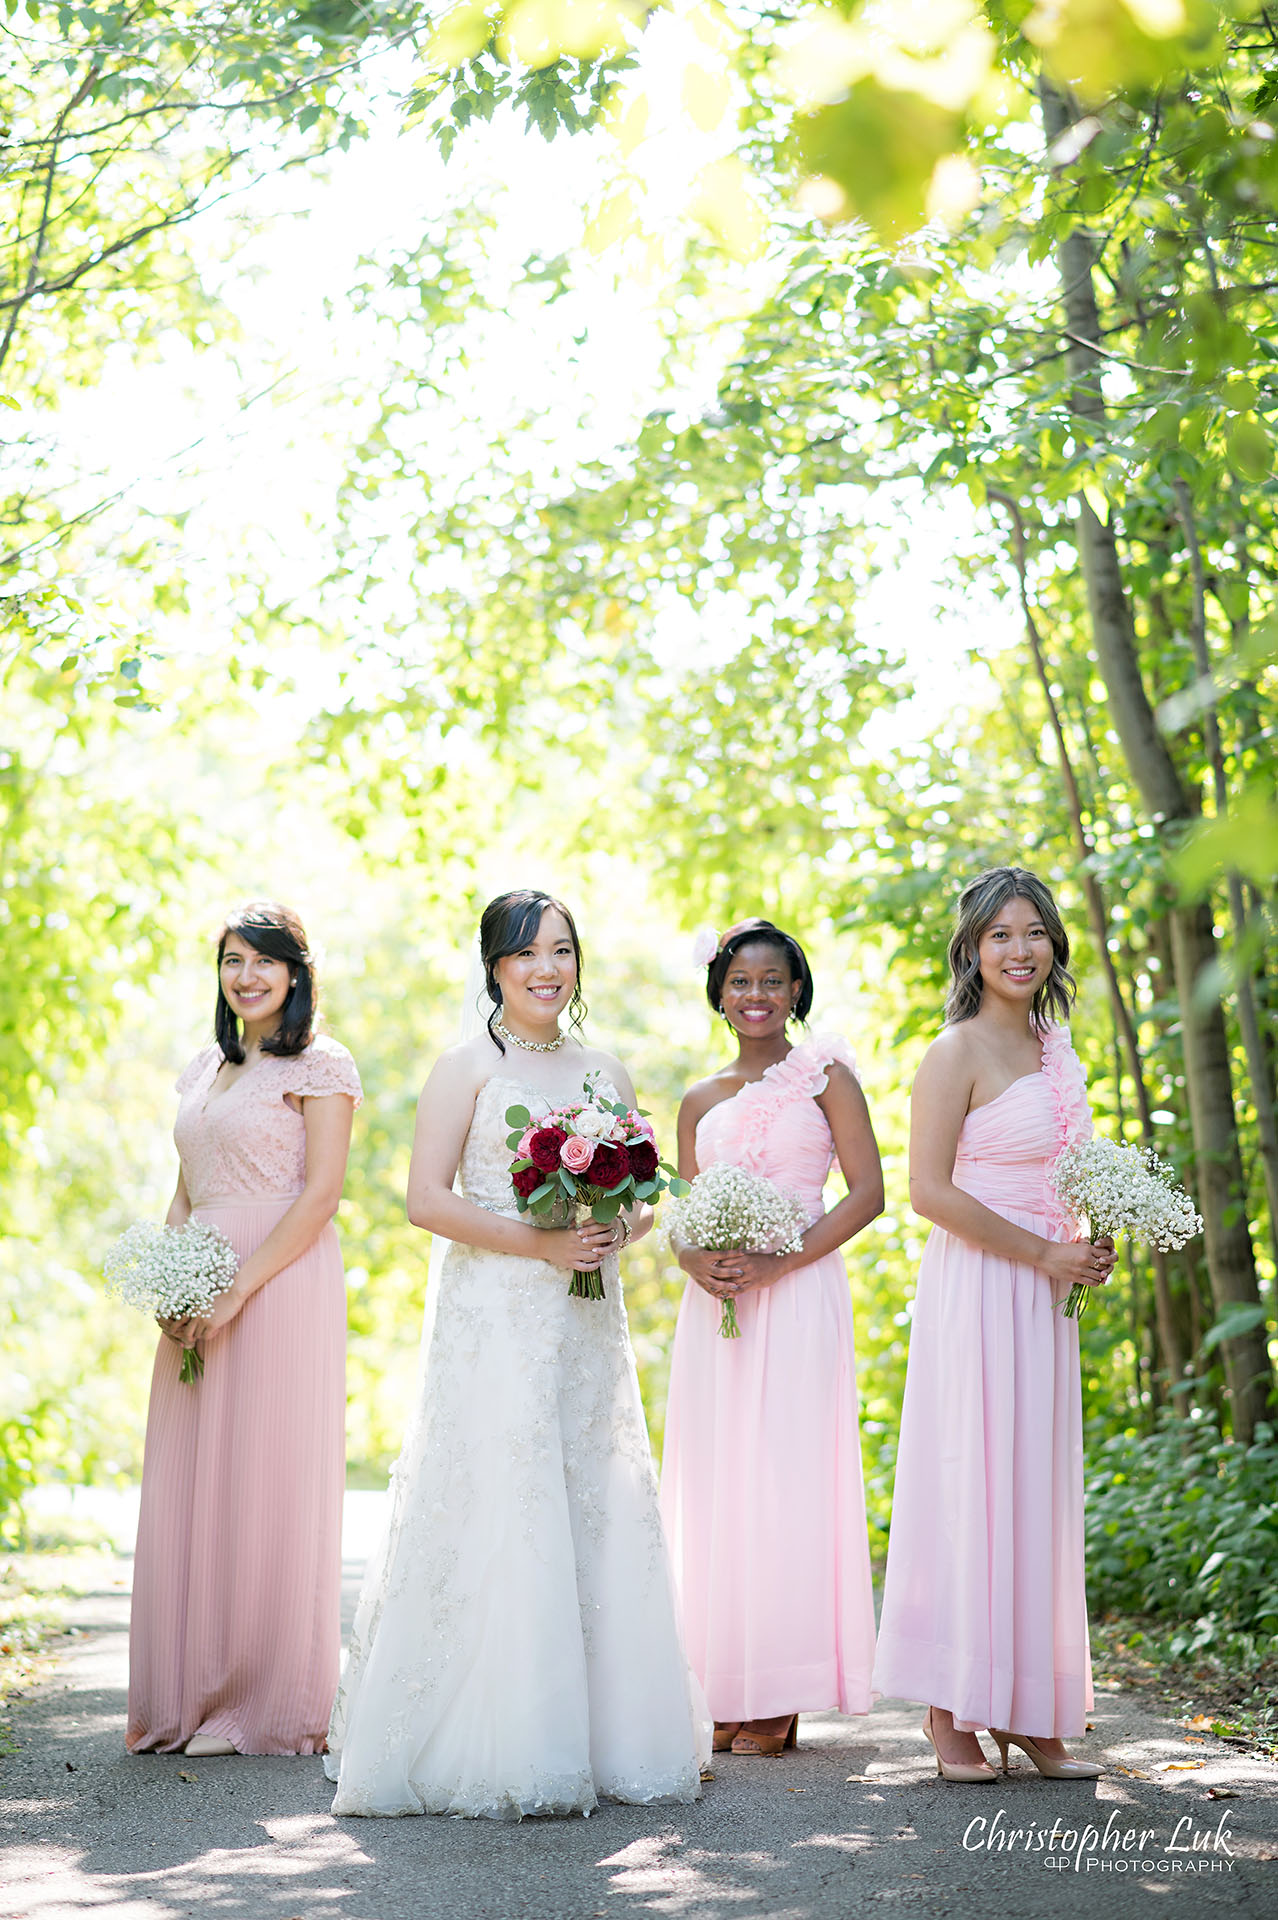 Christopher Luk Toronto Wedding Photographer Bridle Trail Baptist Church Unionville Main Street Crystal Fountain Event Venue Bride Groom Natural Photojournalistic Candid Creative Portrait Session Pictures Bridal Party Maid of Honour Bridesmaids Forest Smile Vertical